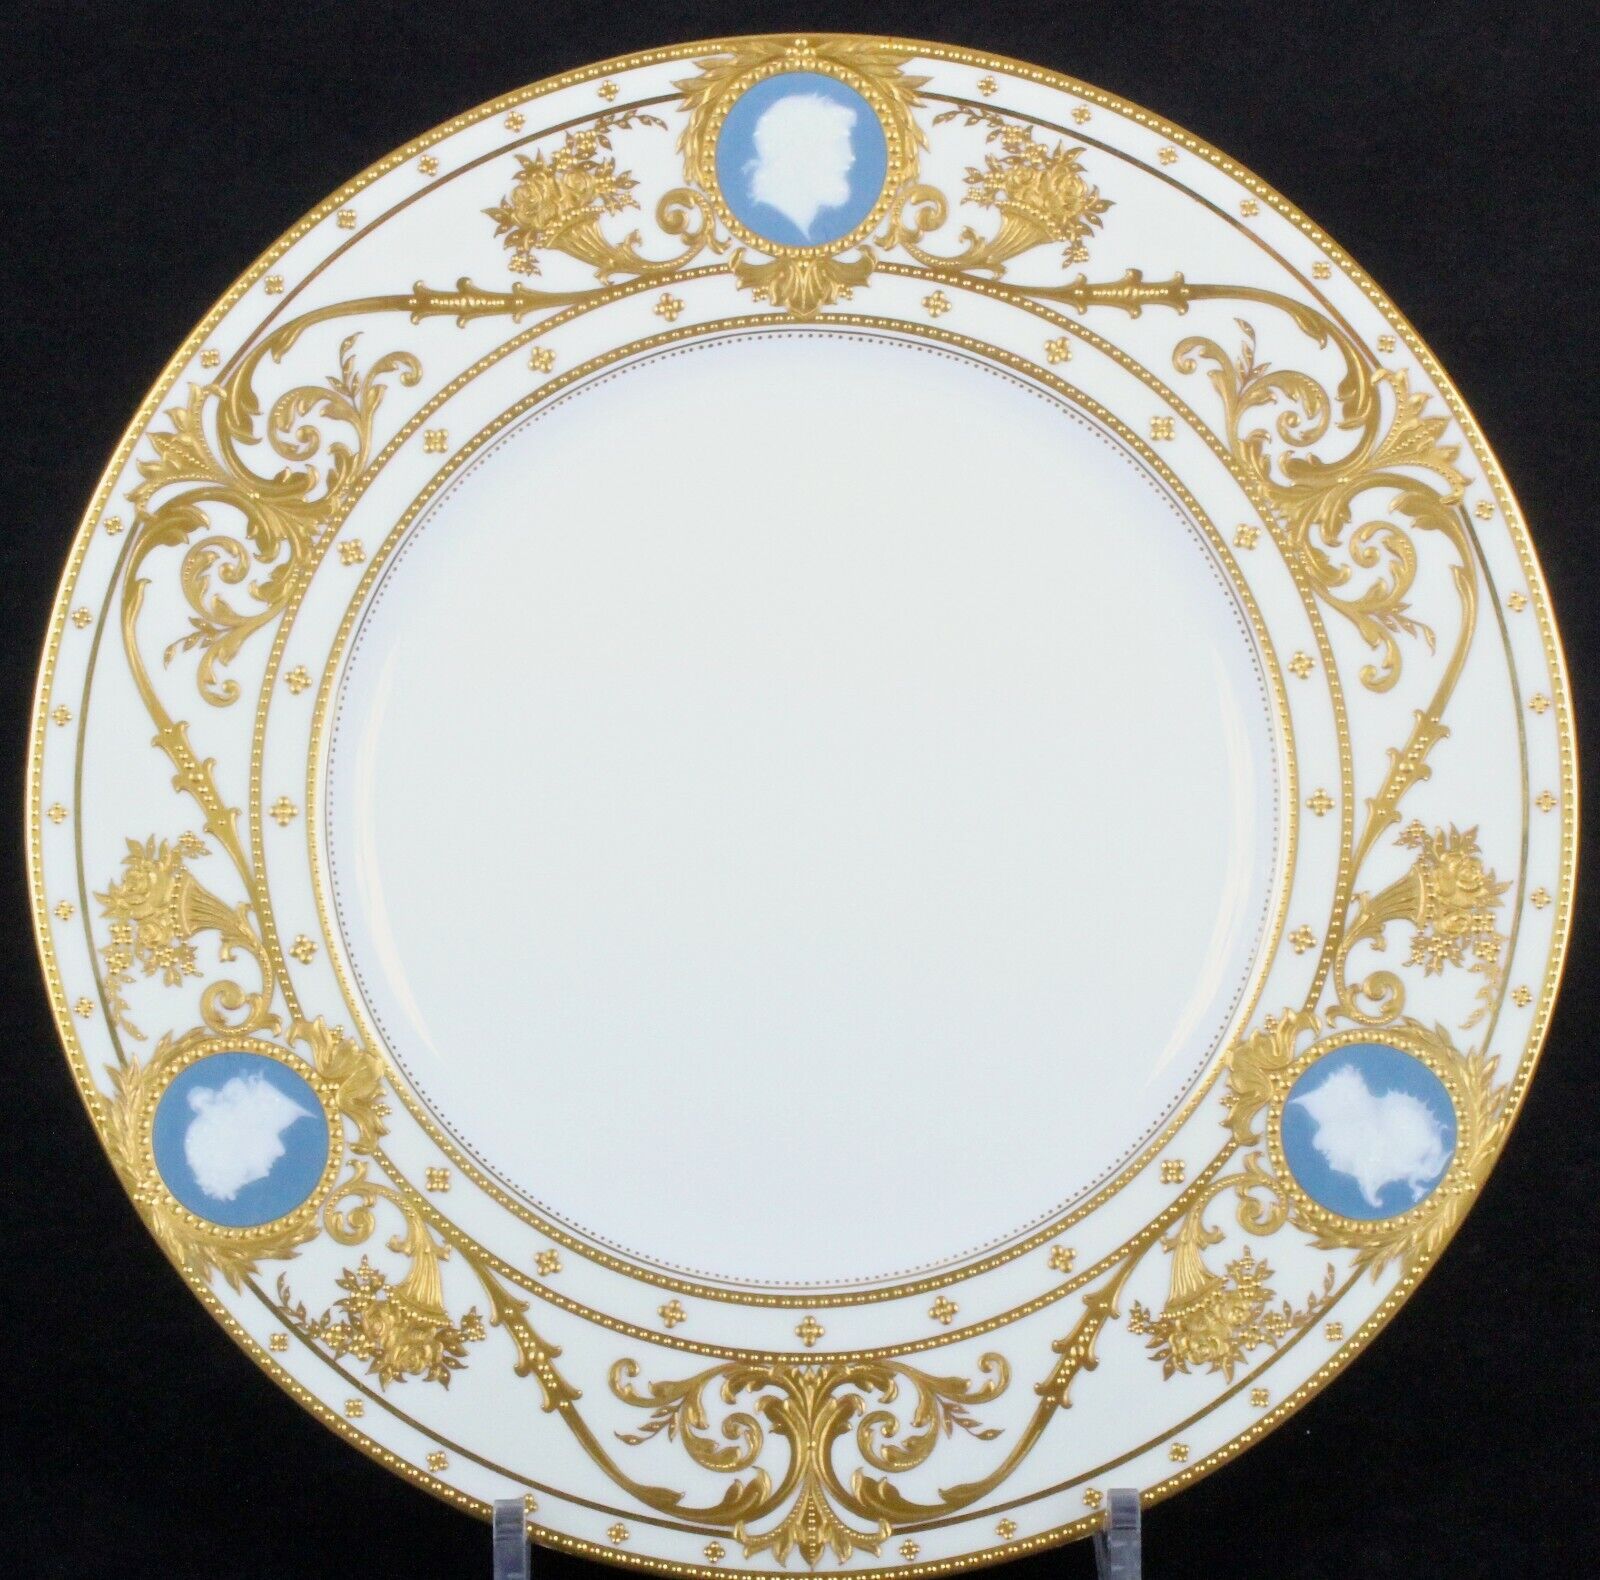 12 Minton Pate-sur-Pate Cameo Plates,  by artist Albion Birks,gilded, gilt, gold